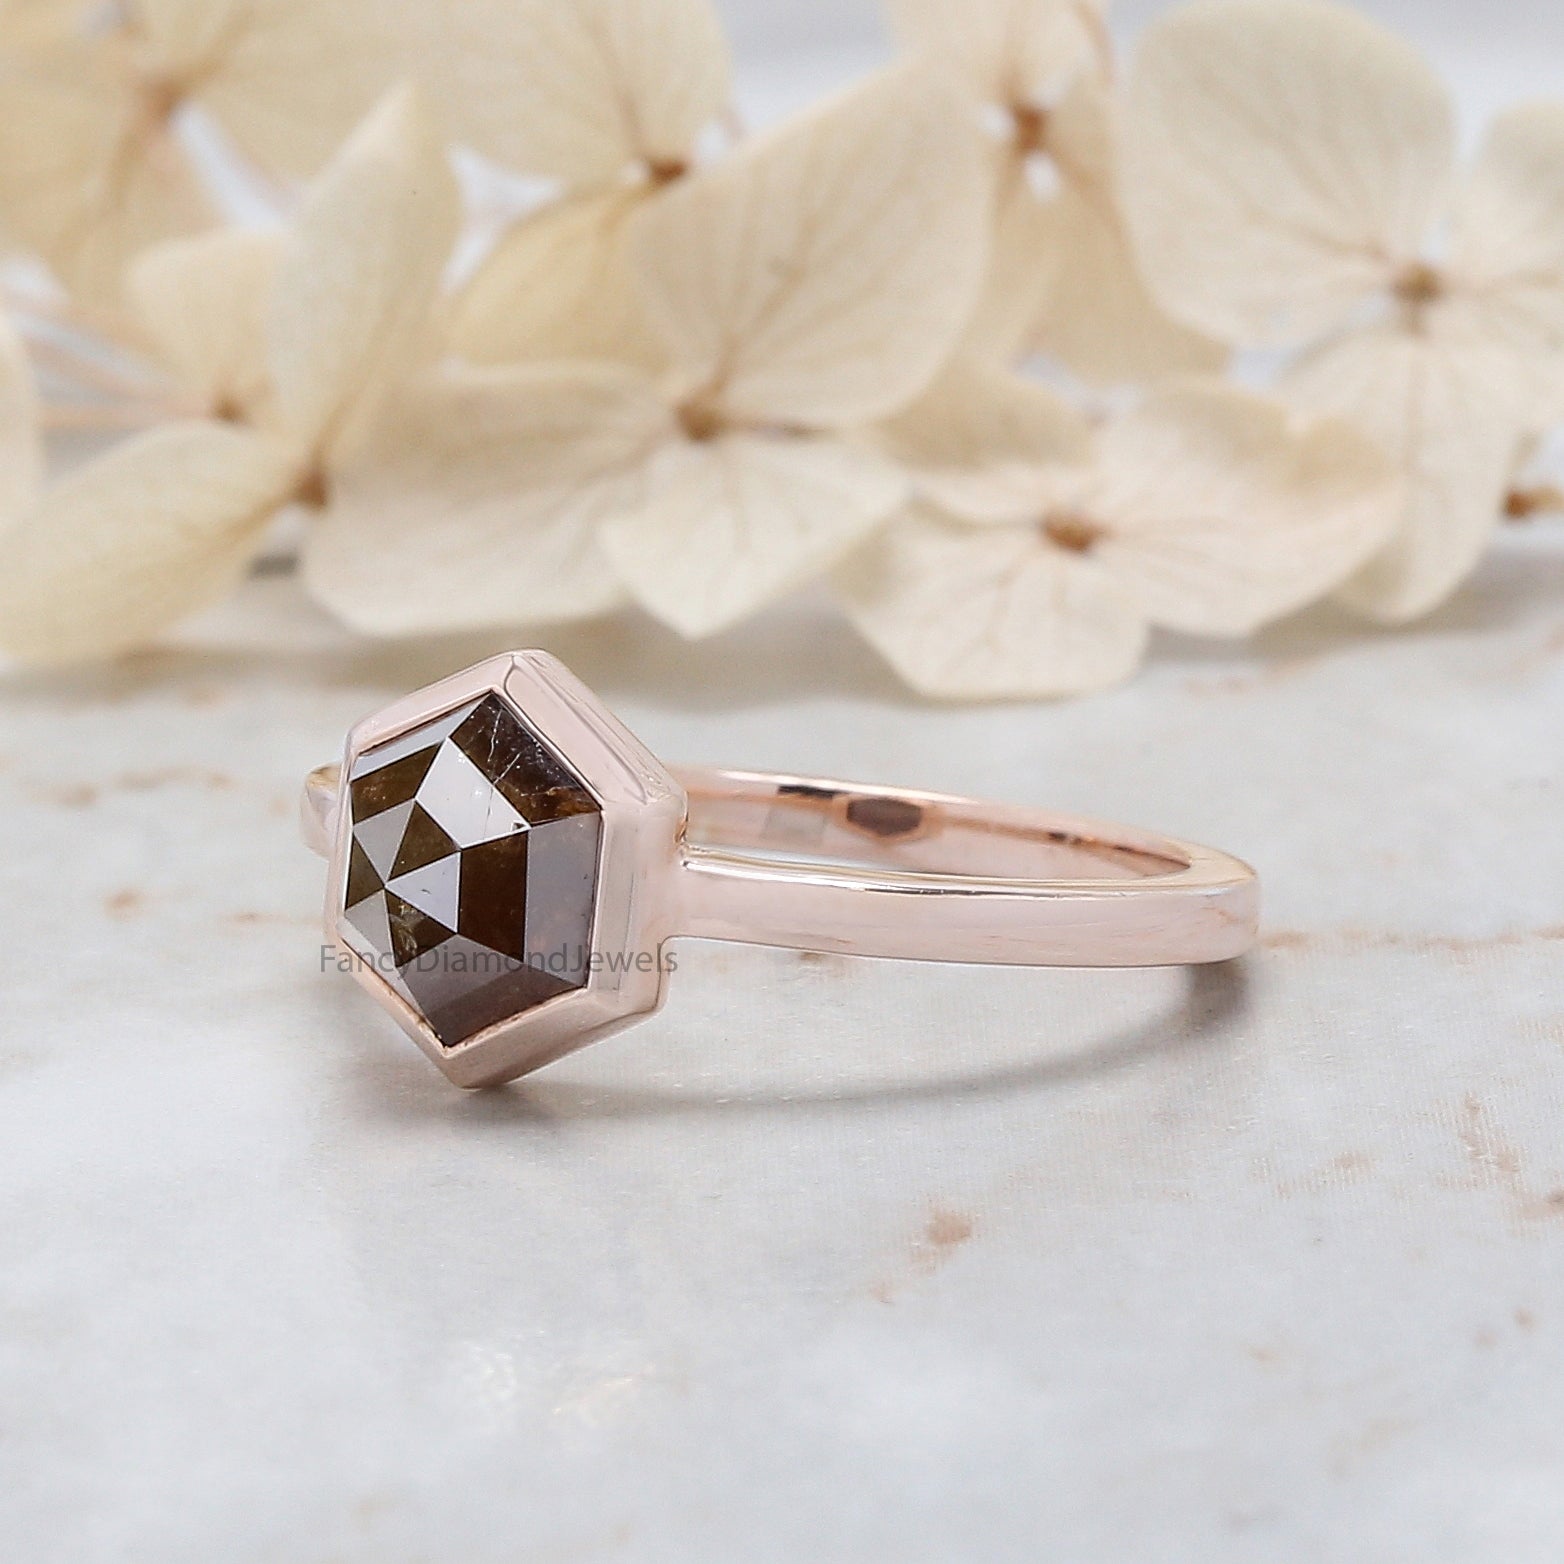 Hexagon Cut Brown Color Diamond Ring 2.26 Ct 6.90 MM Hexagon Shape Diamond Ring 14K Rose Gold Silver Engagement Ring Gift For Her QN9237